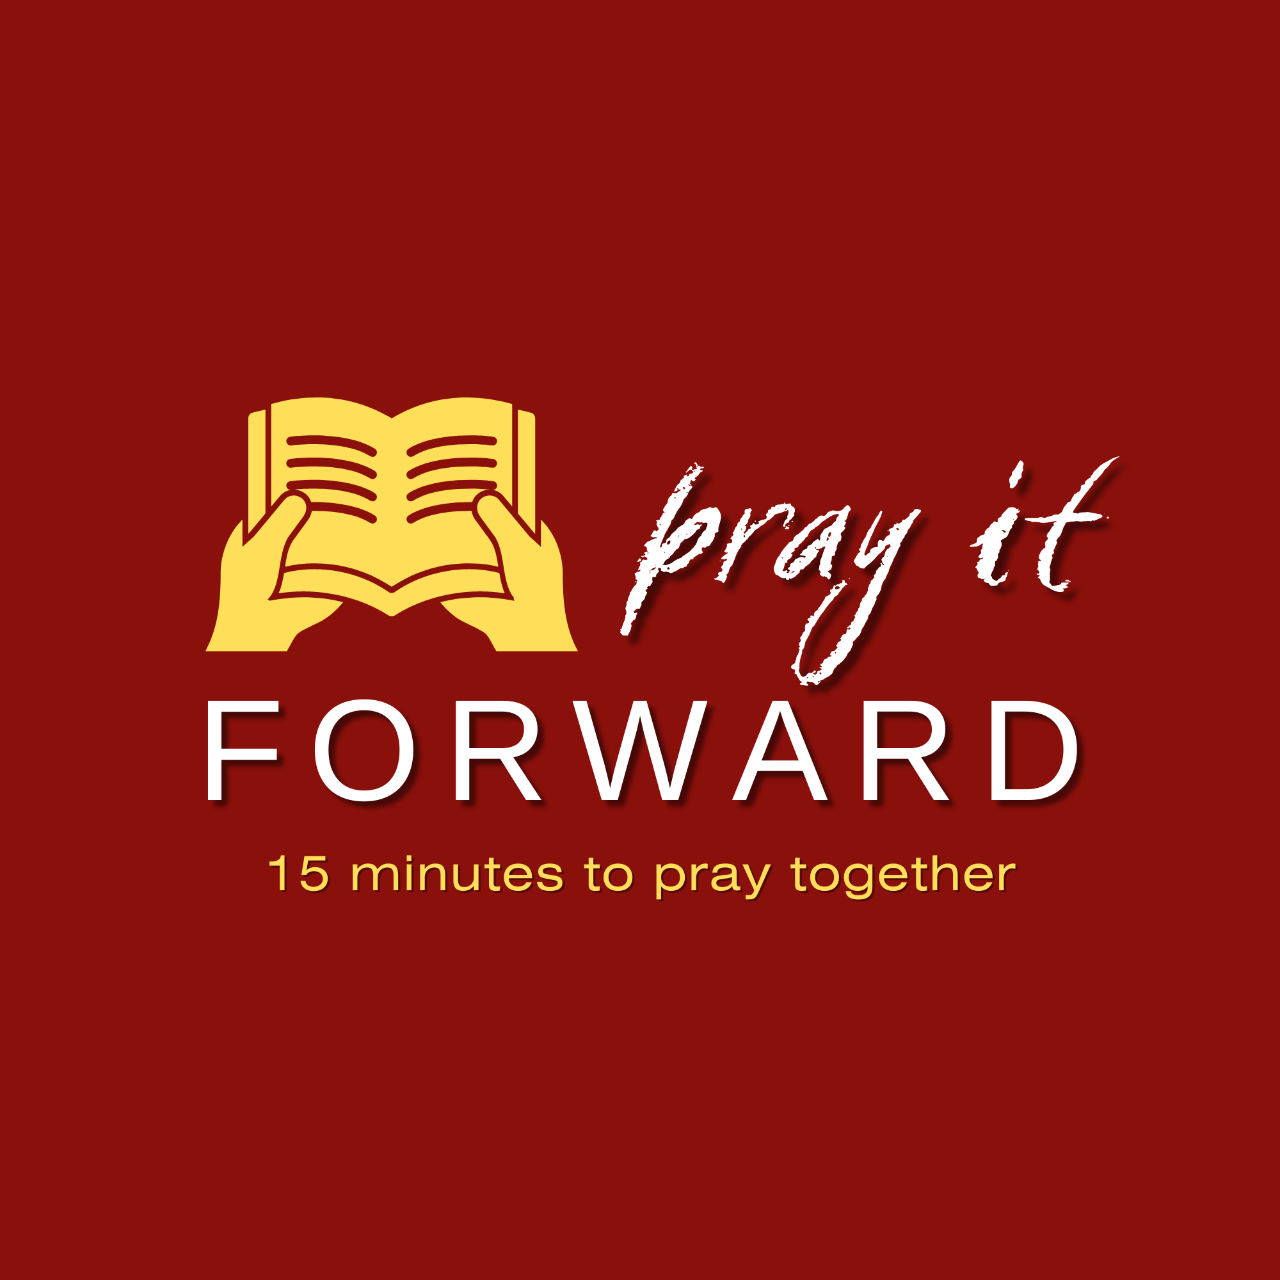 Pray It Forward / 15 minutes to pray together